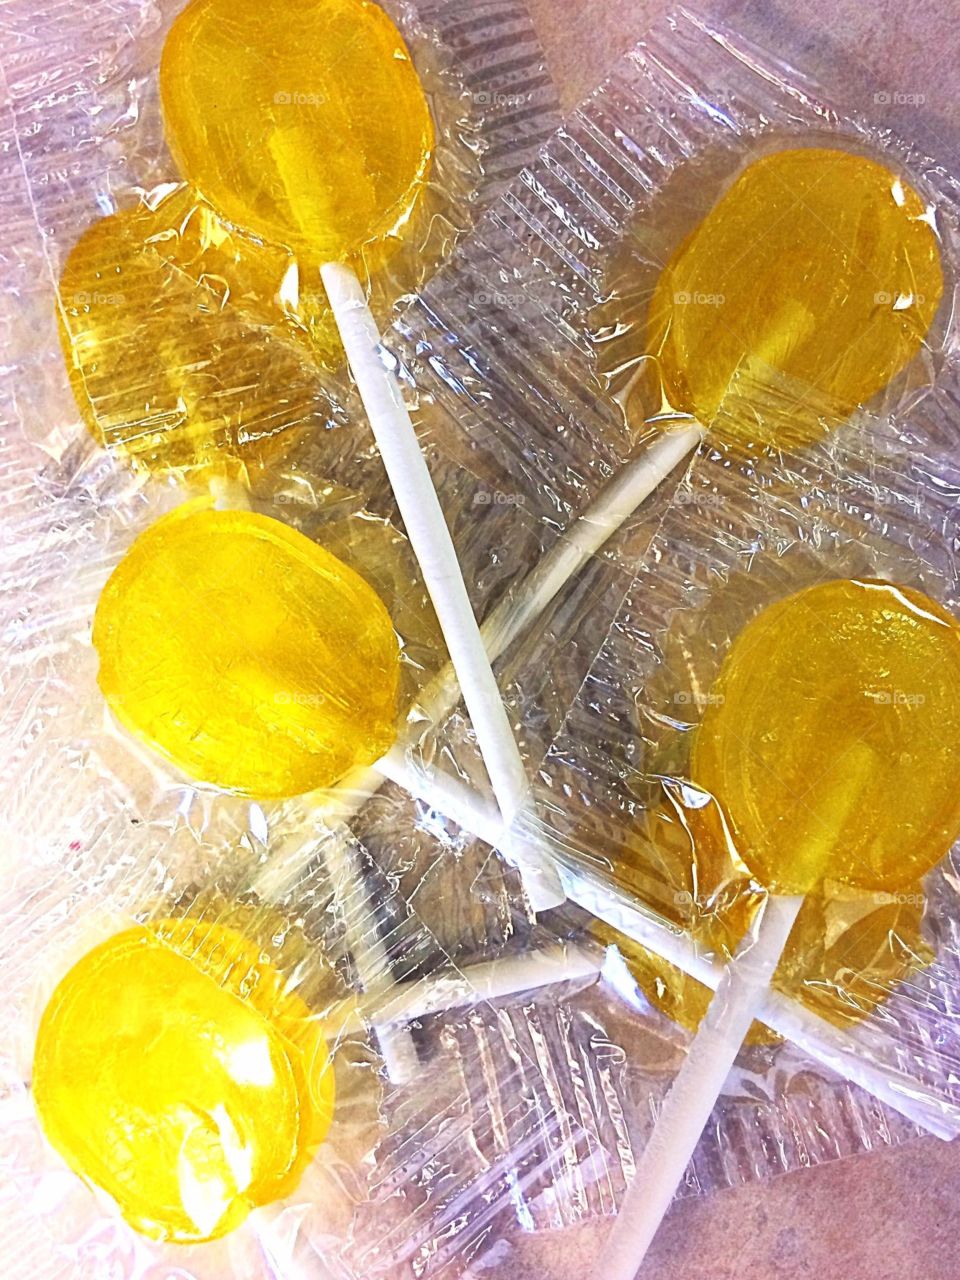 Yellow candies, the ones always left out! 😉
